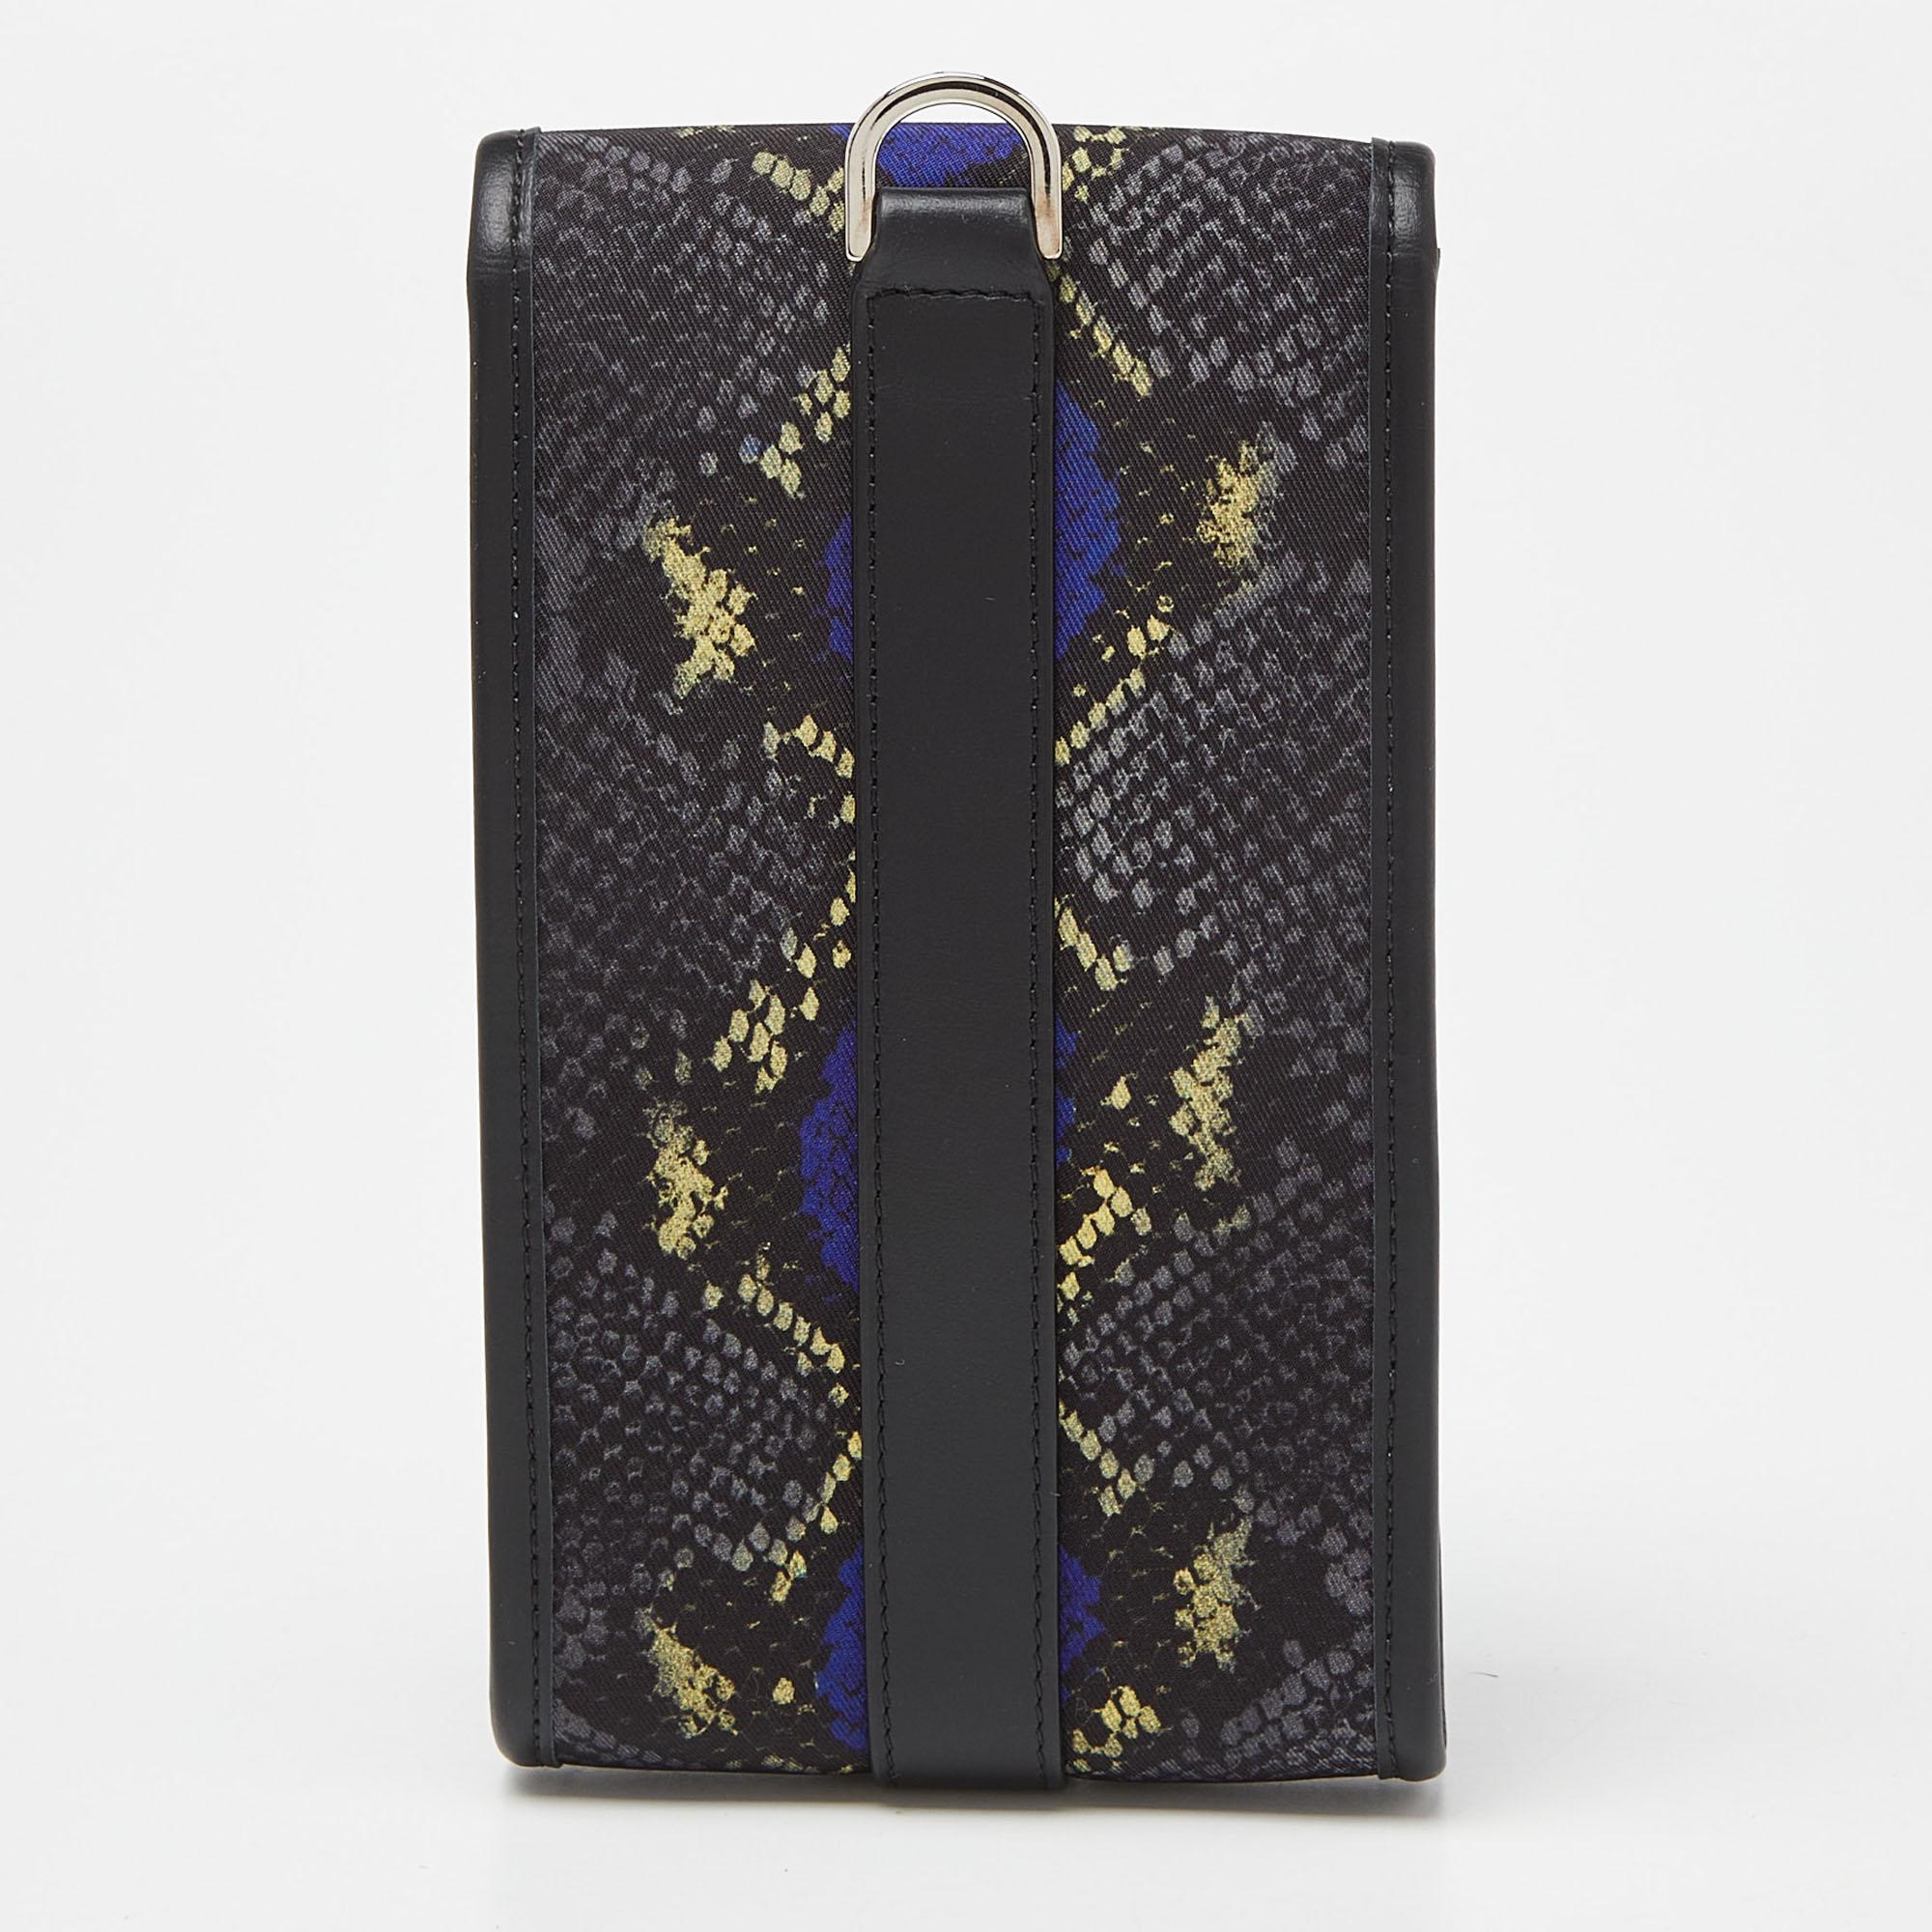 Elevate your tech with the Versace phone case pouch. Crafted from luxurious nylon and leather, it exudes opulence. Vibrant snakeskin-inspired patterns add a touch of exotic flair. Designed for both style and function, it seamlessly merges fashion